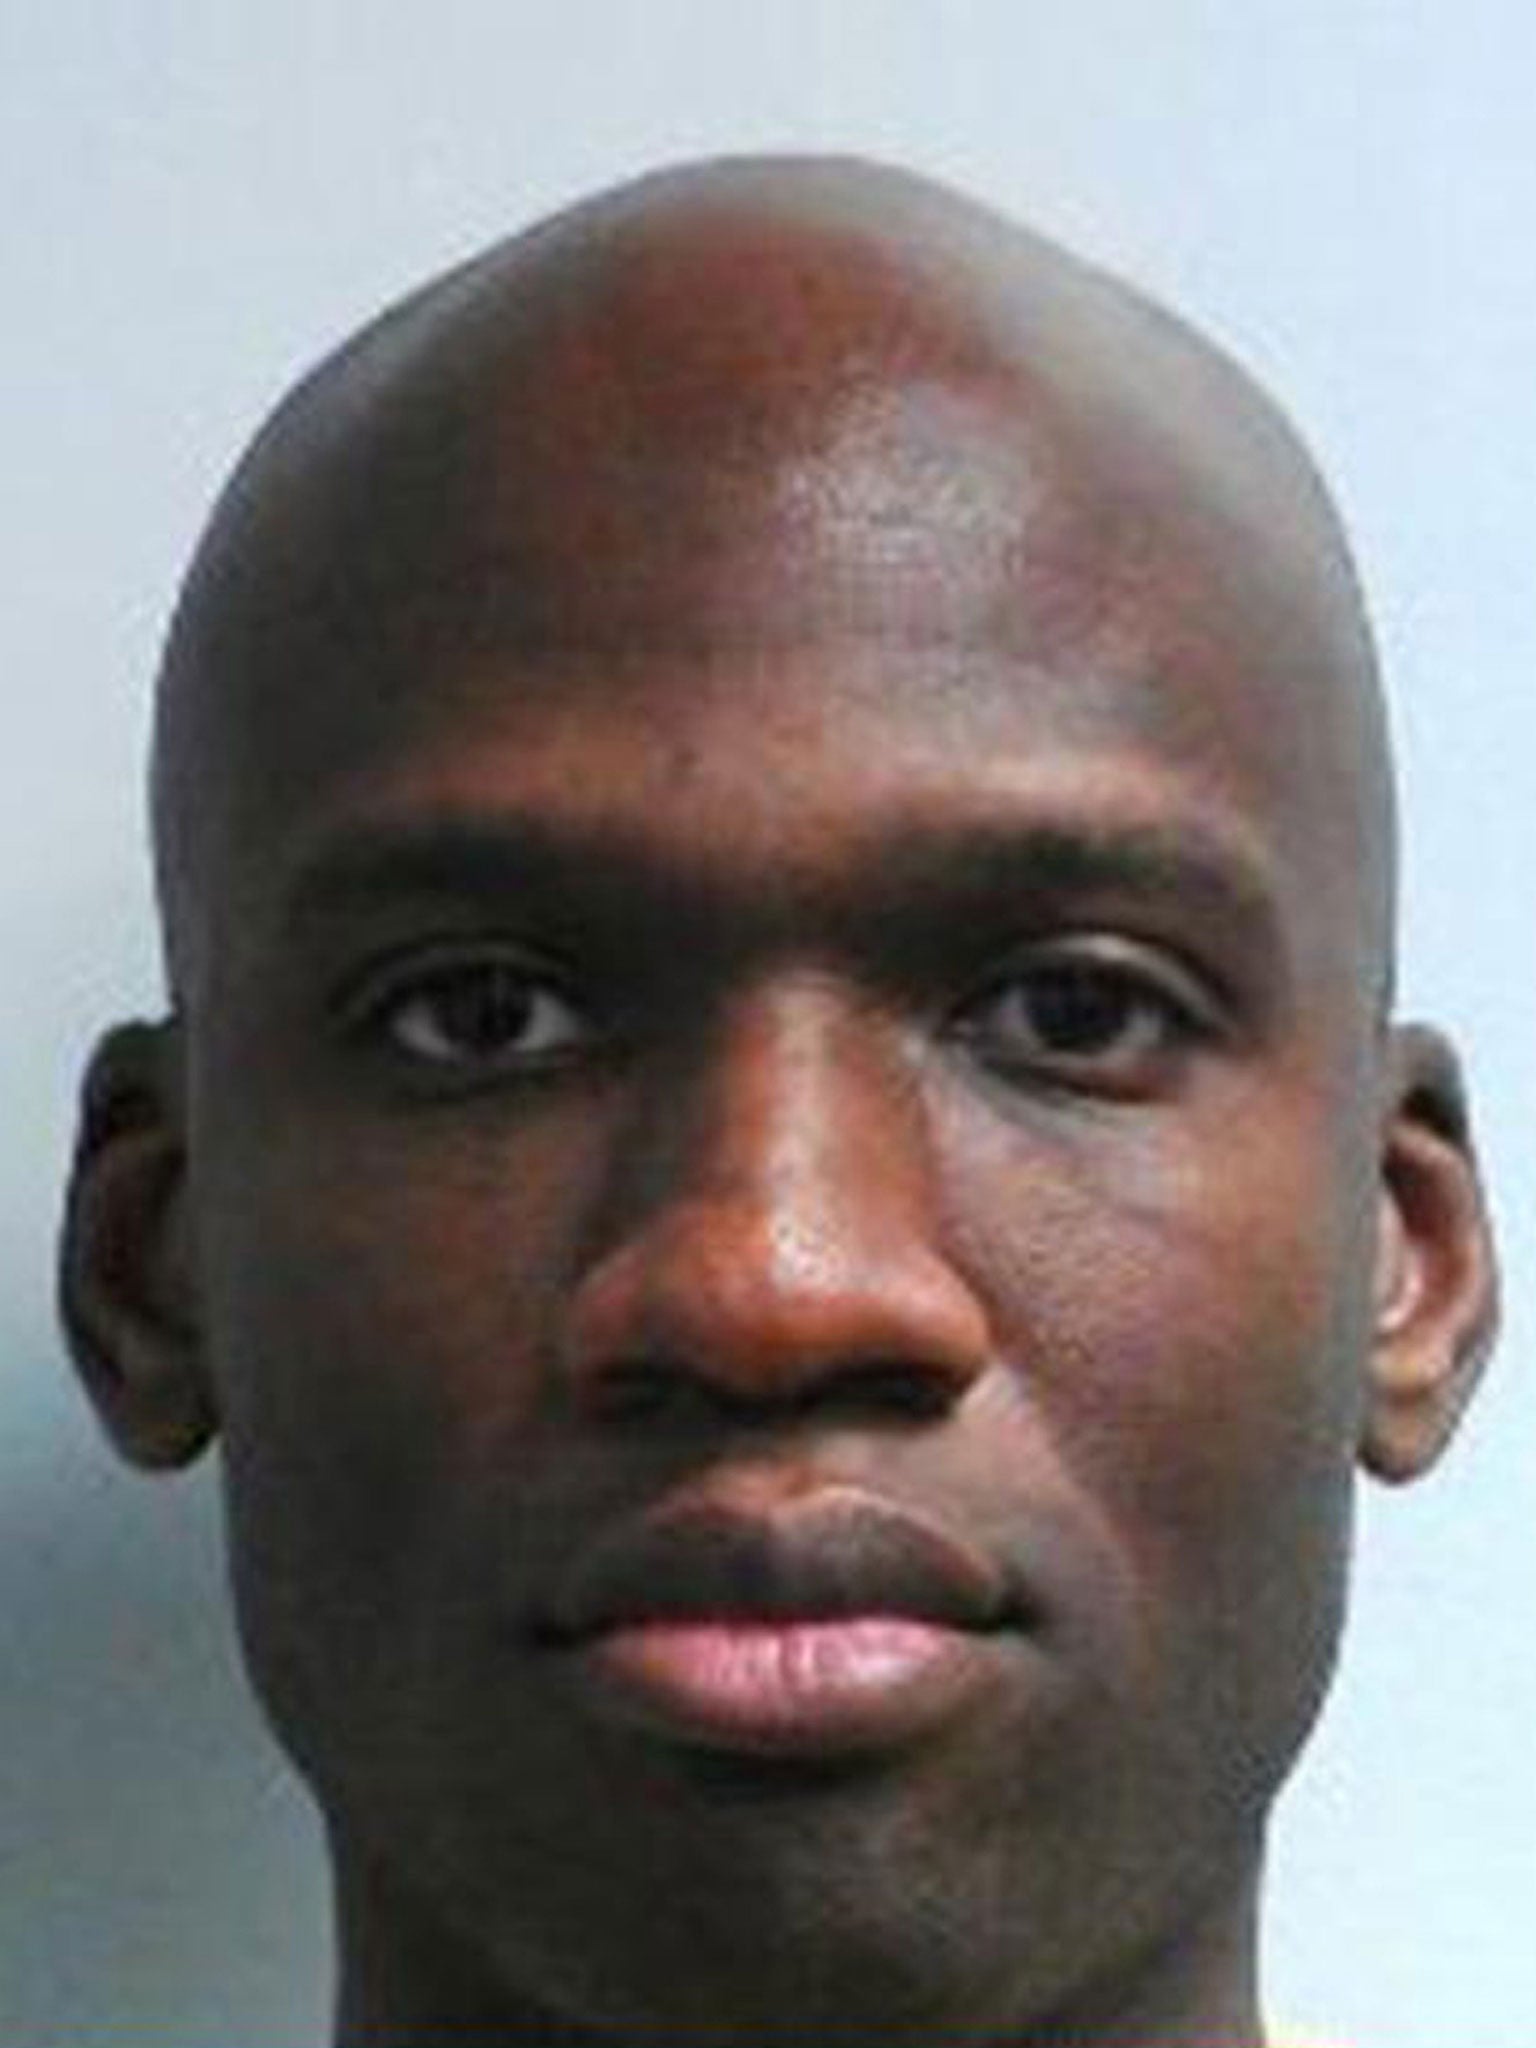 Aaron Alexis, who the FBI believe to be responsible for the shootings at the Washington Navy Yard, is shown in this photo released by the FBI. He was among the dead at the scene